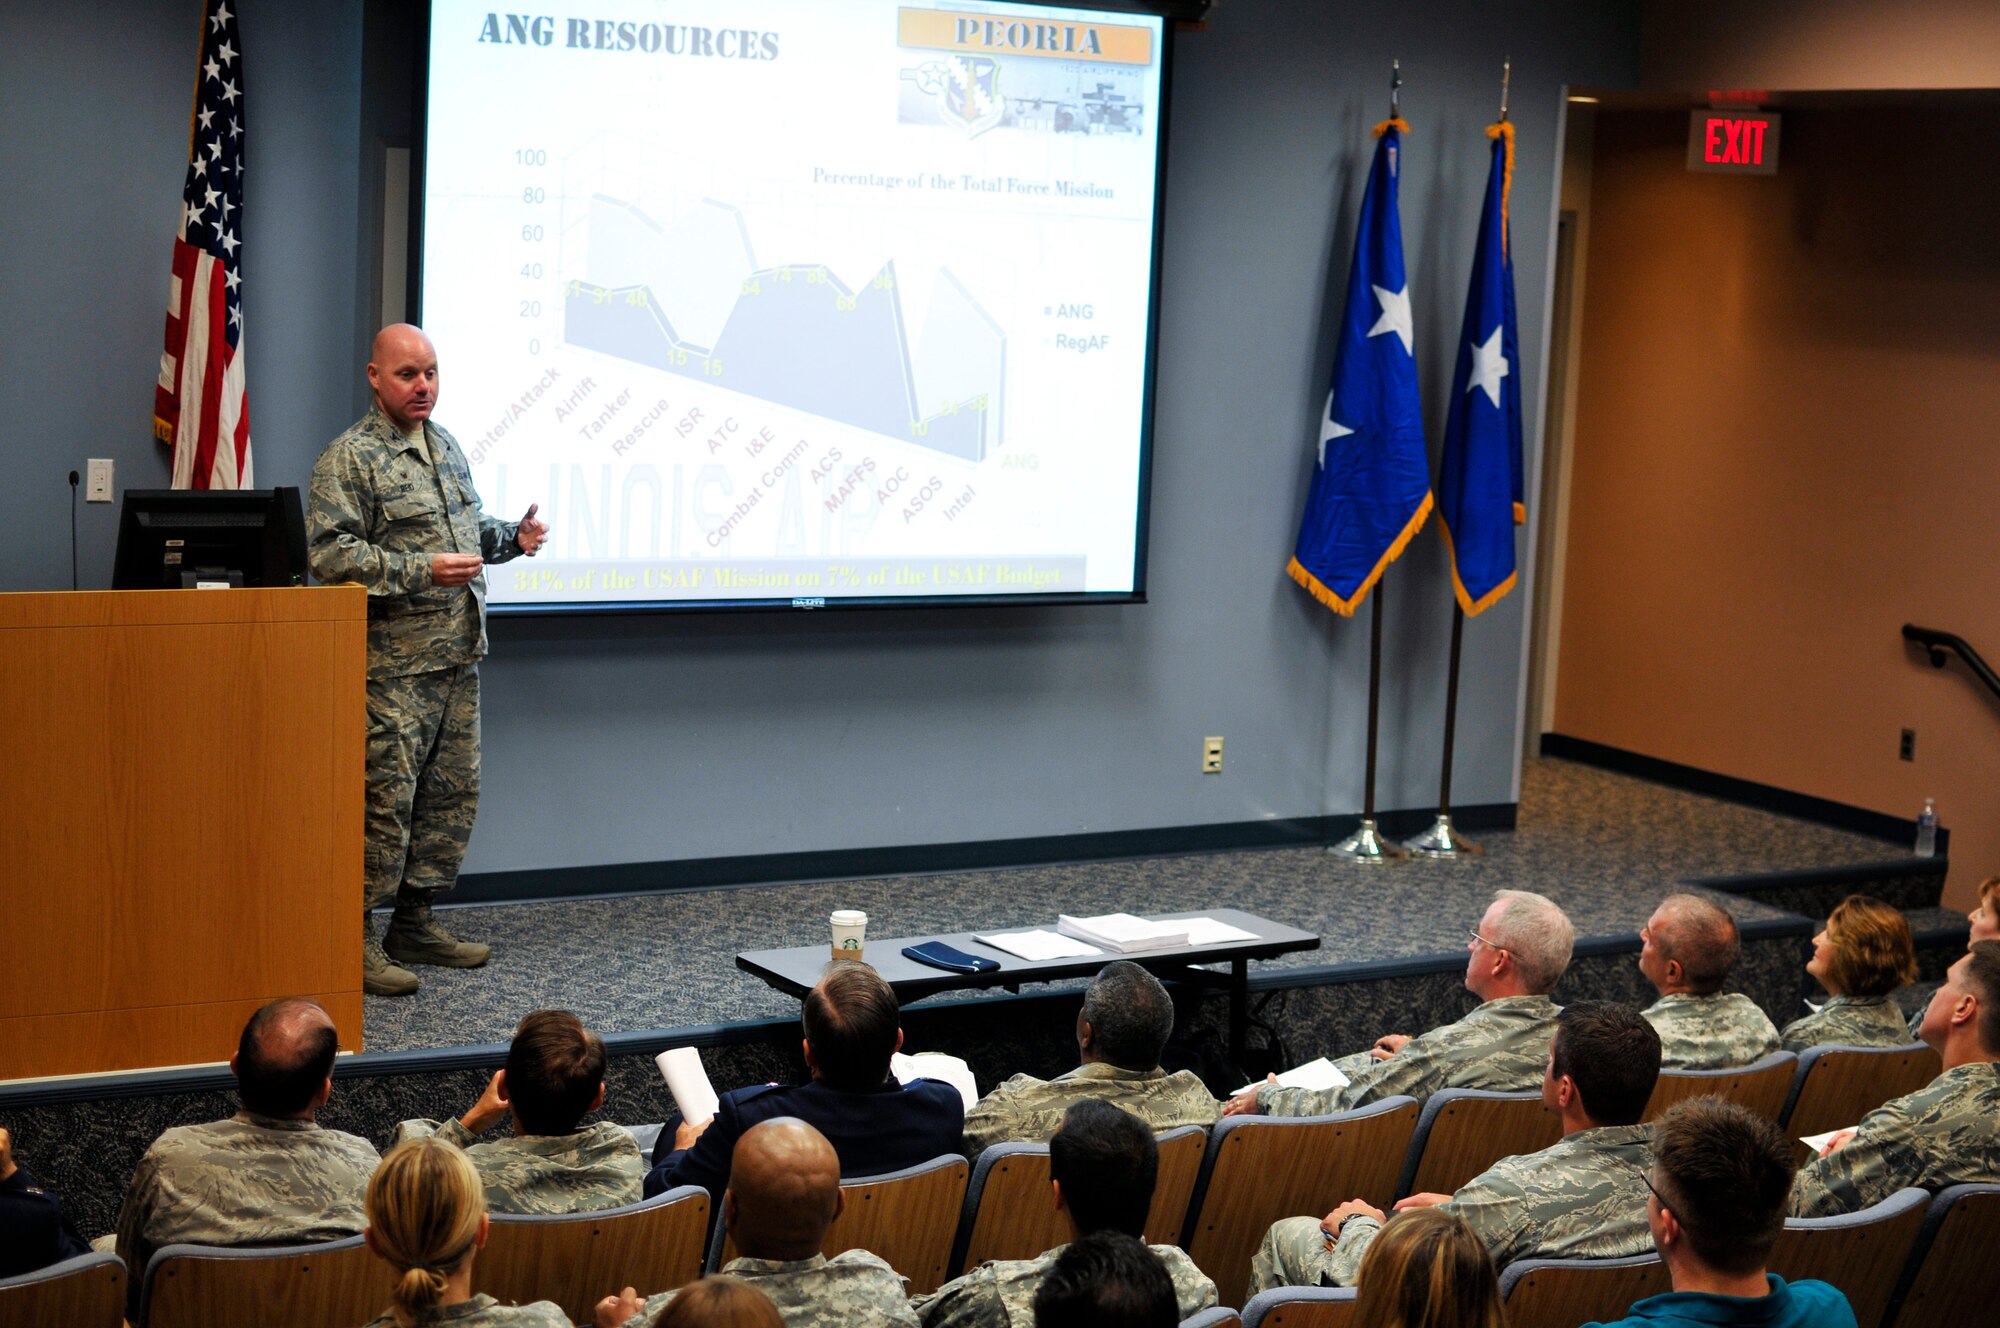 U.S. Air Force Col. Cory K. Reid, commander of the 182nd Mission Support Group, Illinois Air National Guard, speaks to Air and Army National Guard legal professionals during a joint-force training workshop at the 182nd Airlift Wing, Peoria, Ill., Sept. 12, 2015. The Judge Advocate General Corps provides professional counsel and a full spectrum of legal capabilities to Airmen. (U.S. Air National Guard photo by Staff Sgt. Lealan Buehrer/Released)